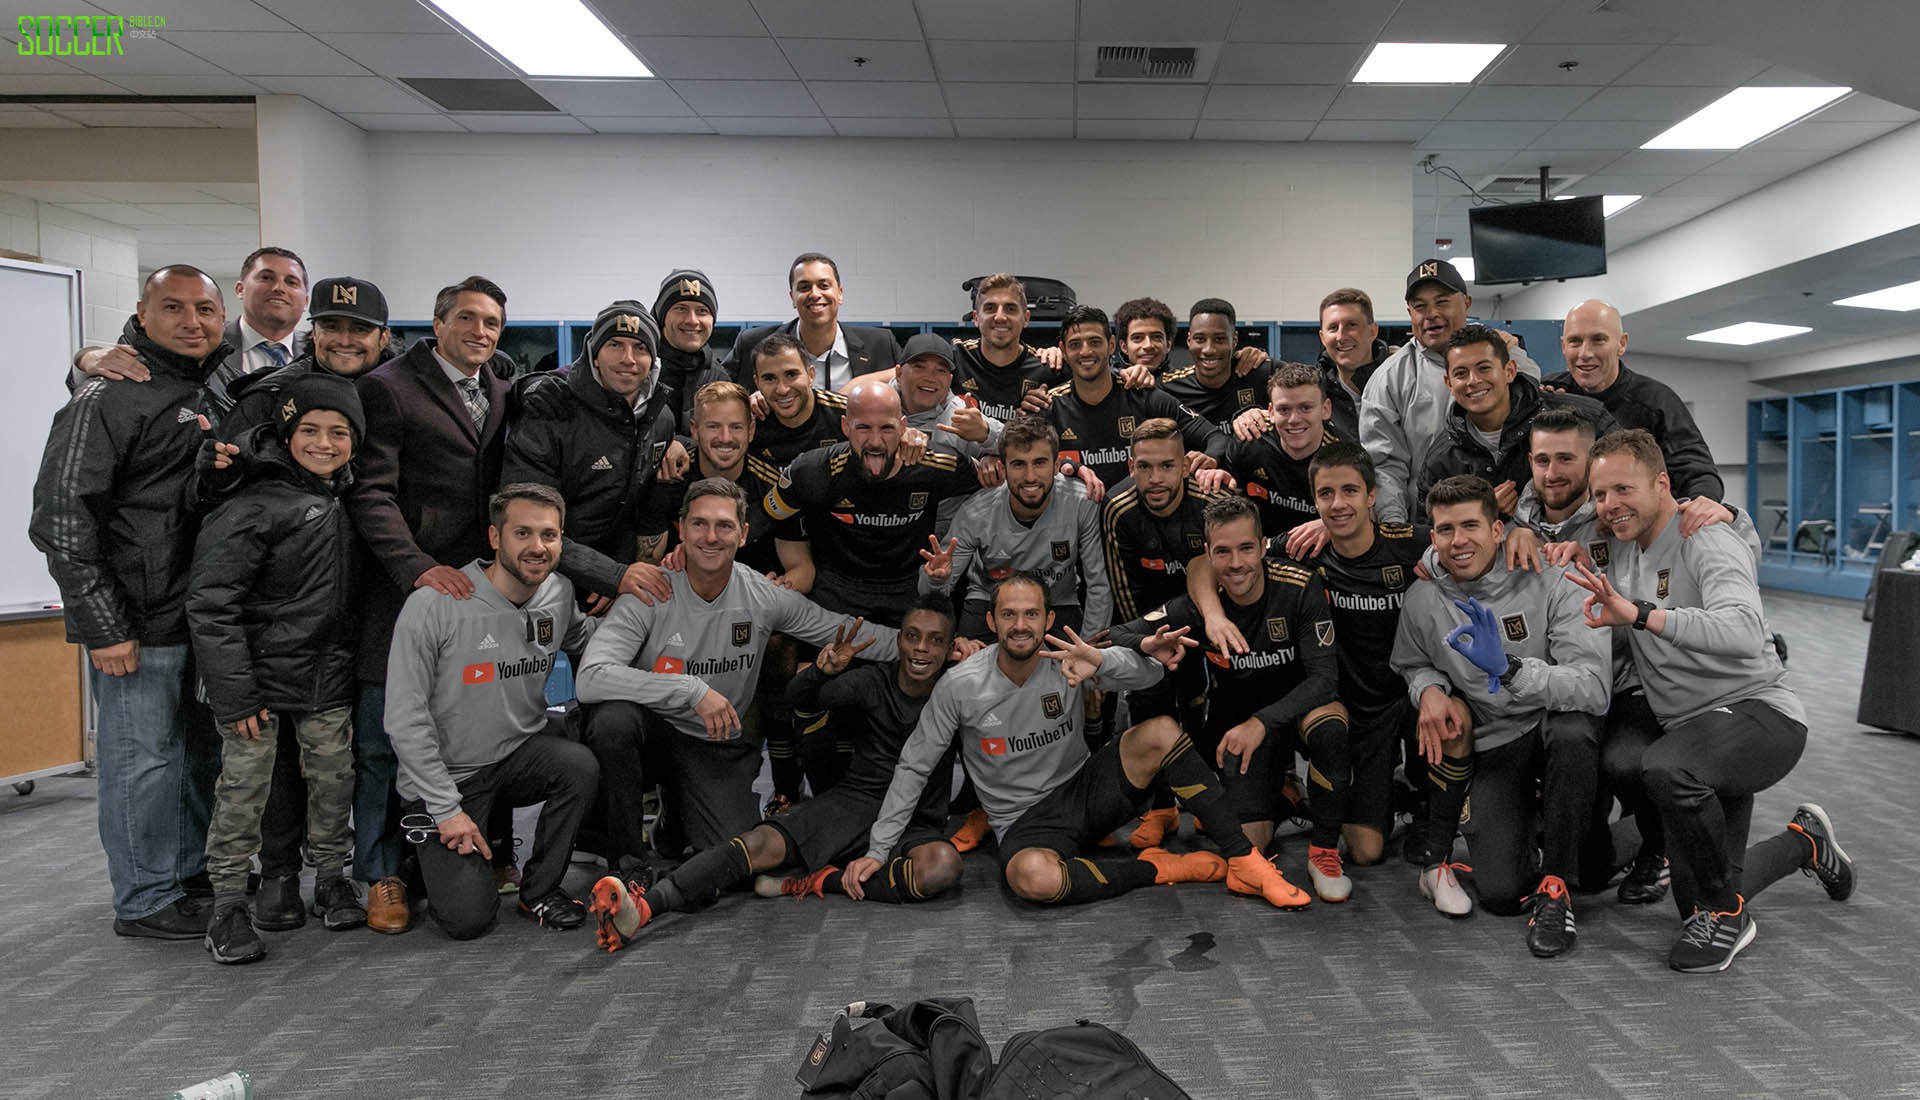 lafc-first-win-soccerbible_0020_2o7a0100